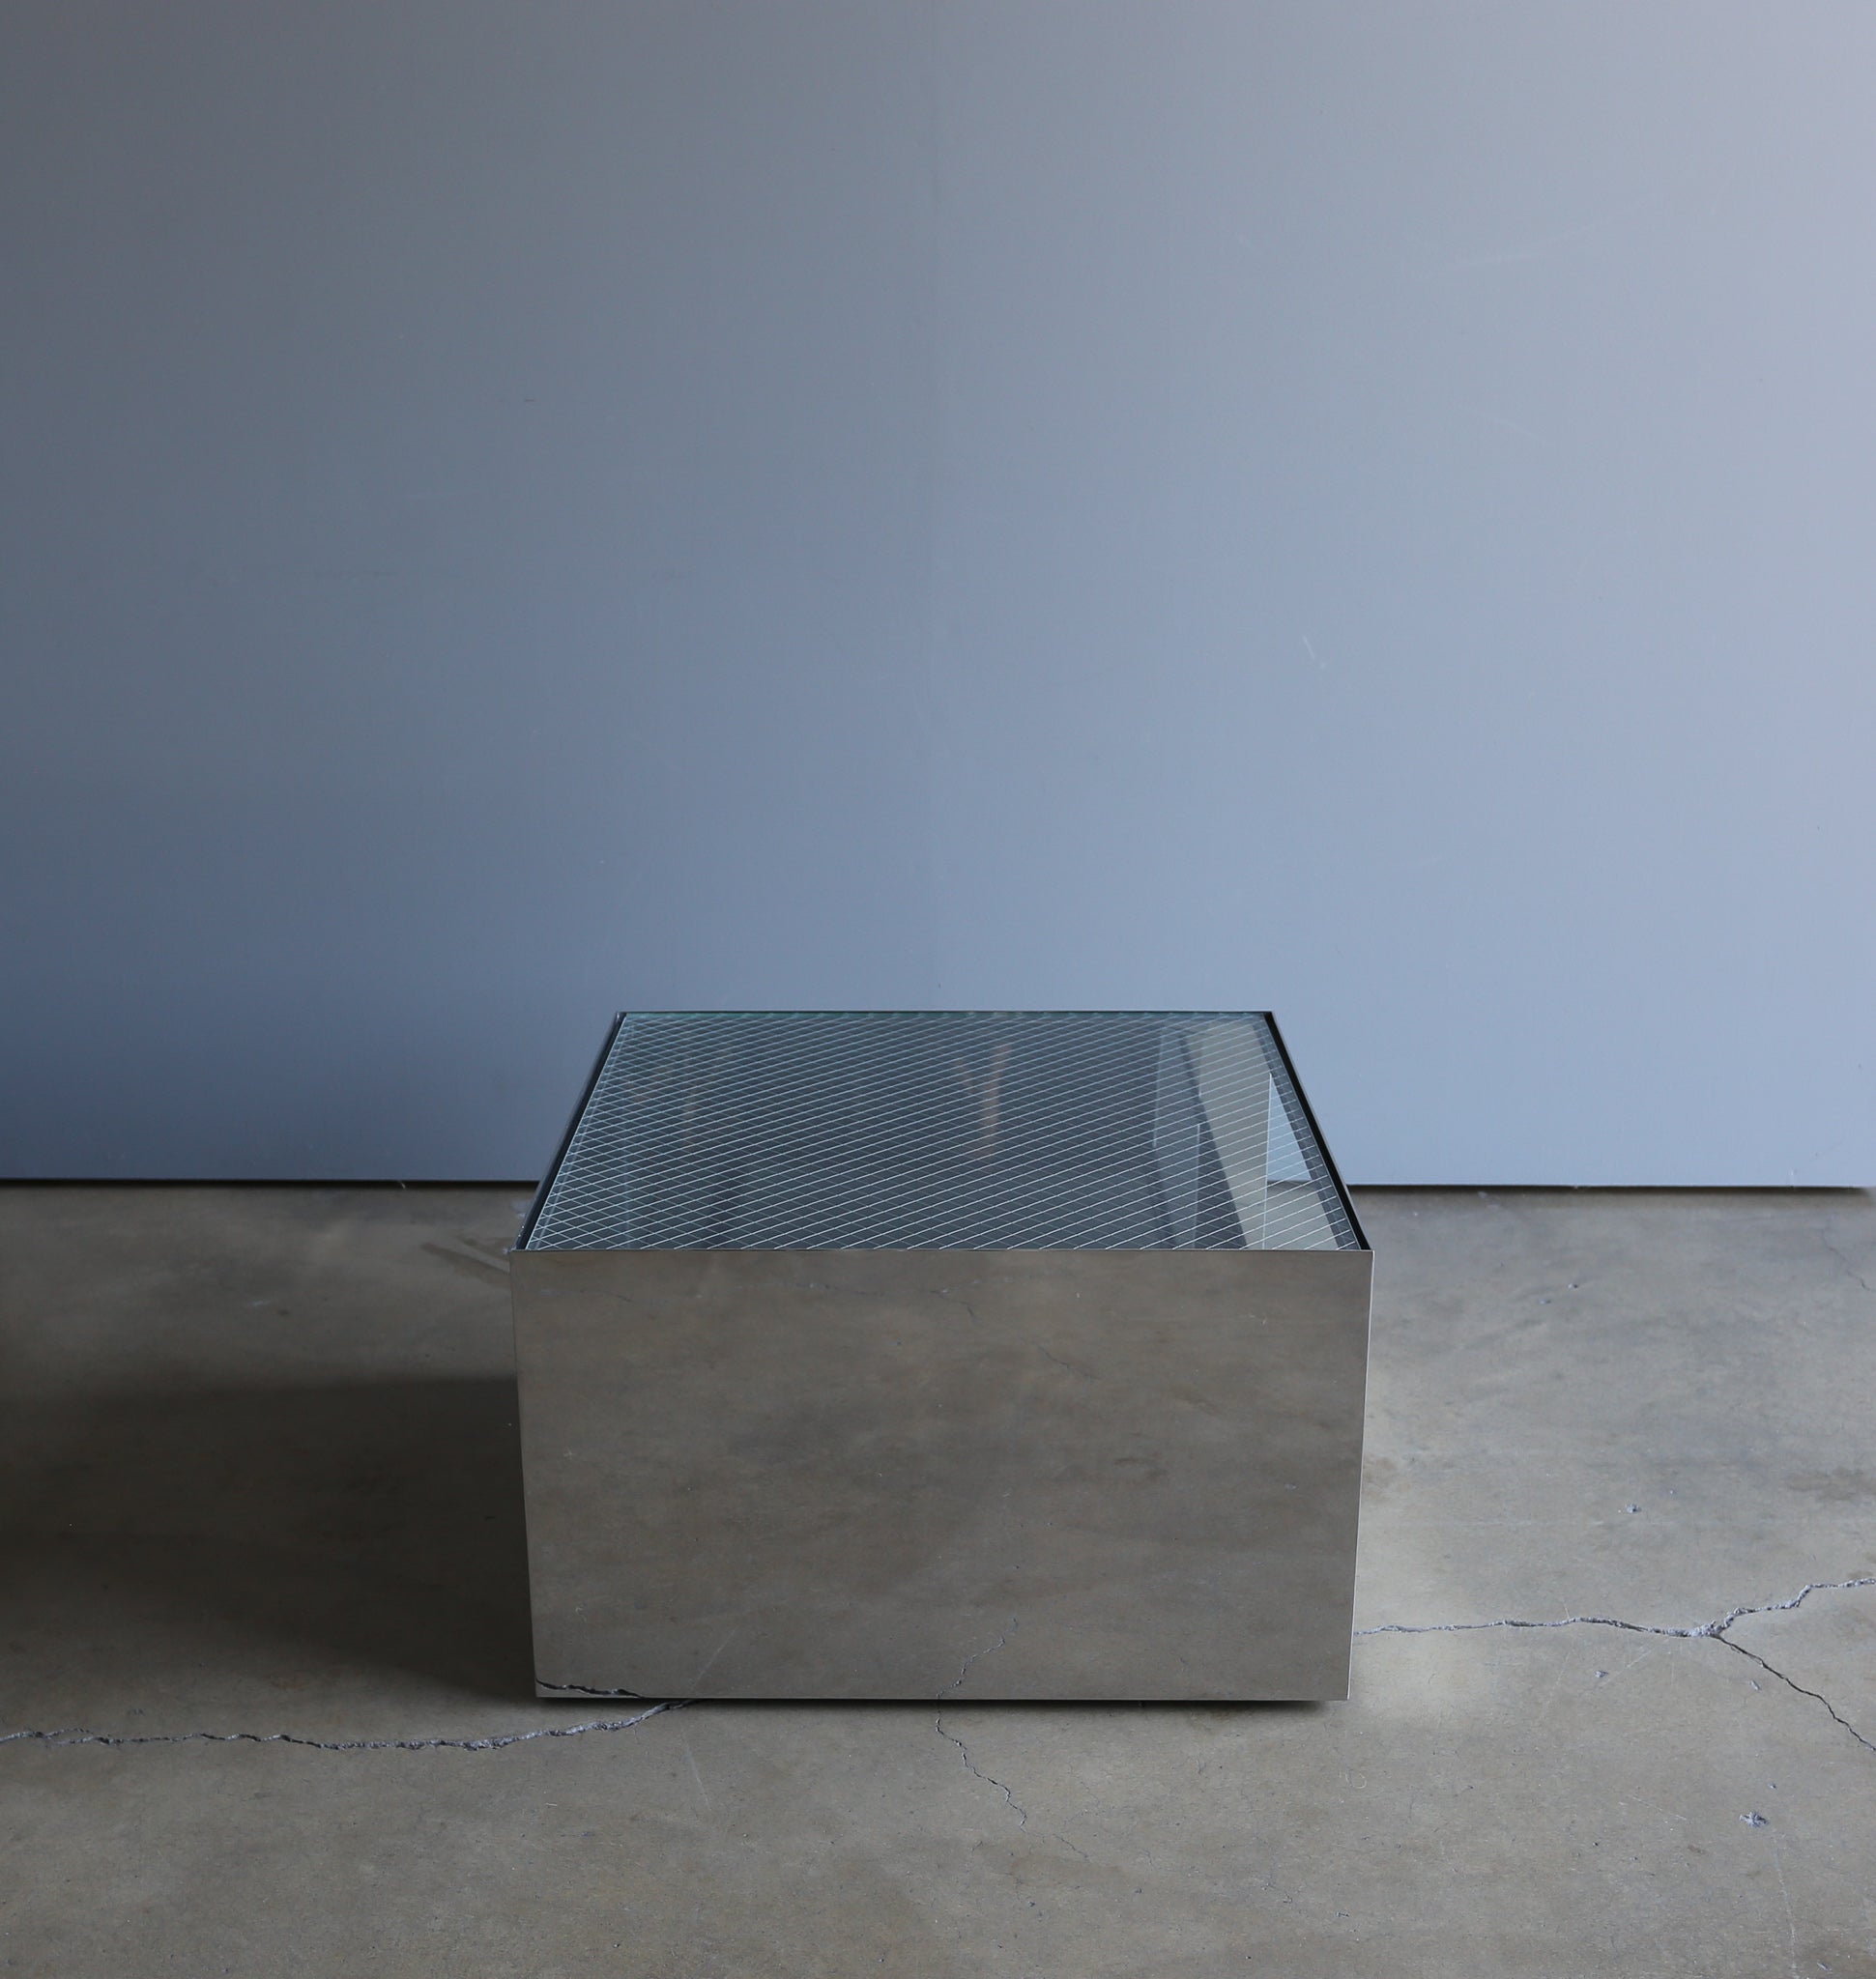 = SOLD = Joe D'urso Polished Stainless Steel Table for Knoll, circa 1981